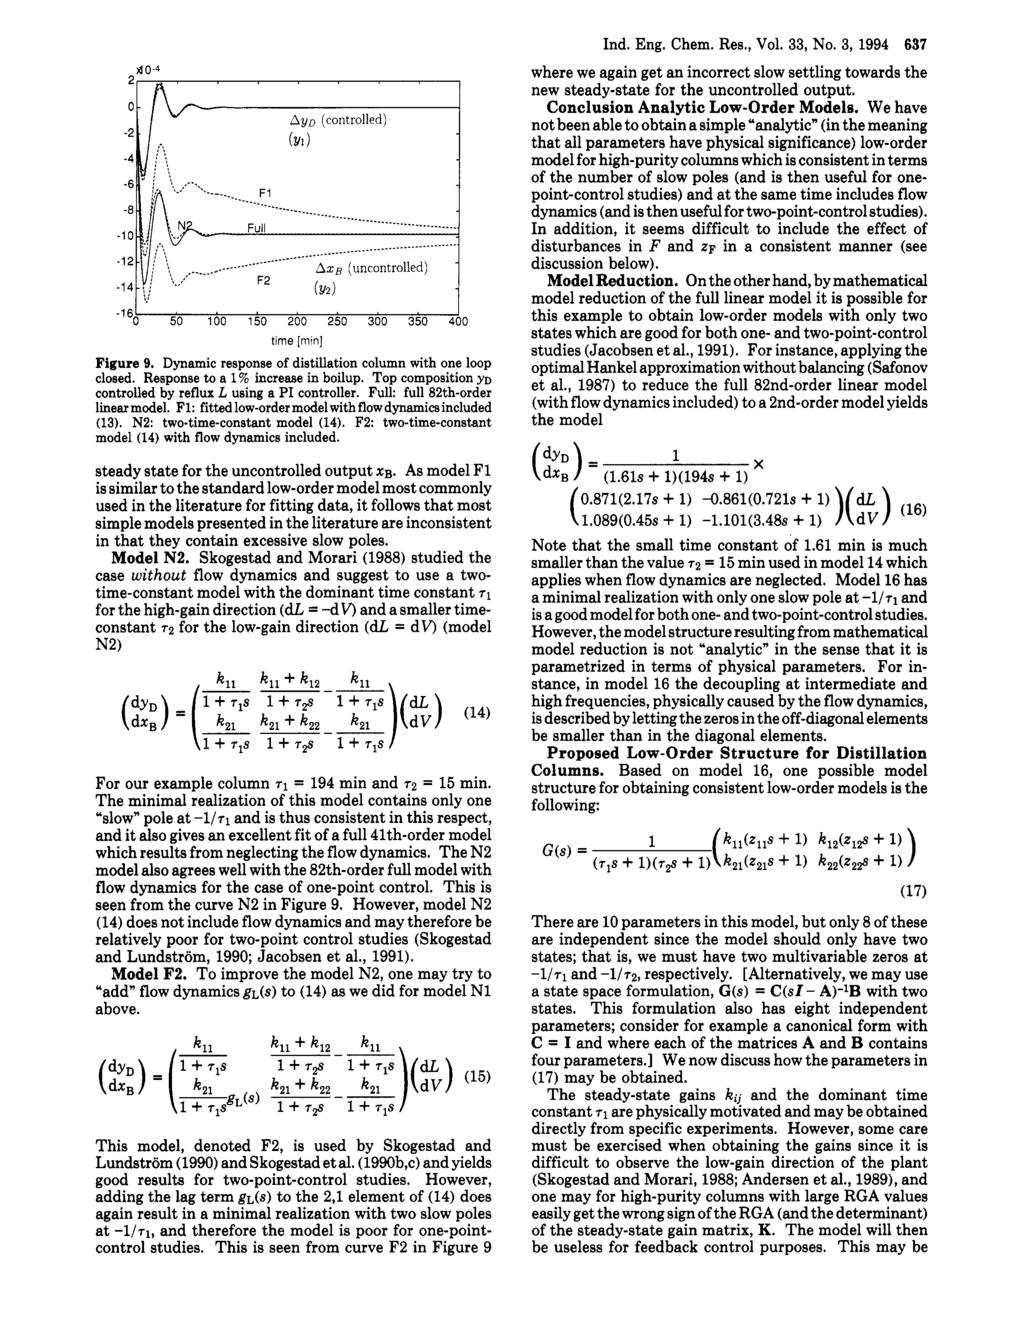 d 0-4 21 A I.. - -2 O t Ayo (controlled) (Y1) -l6!l 50 I00 150 200 250 300 350 4hO time [rnin] Figure 9. Dynamic response of distillation column with one loop closed.